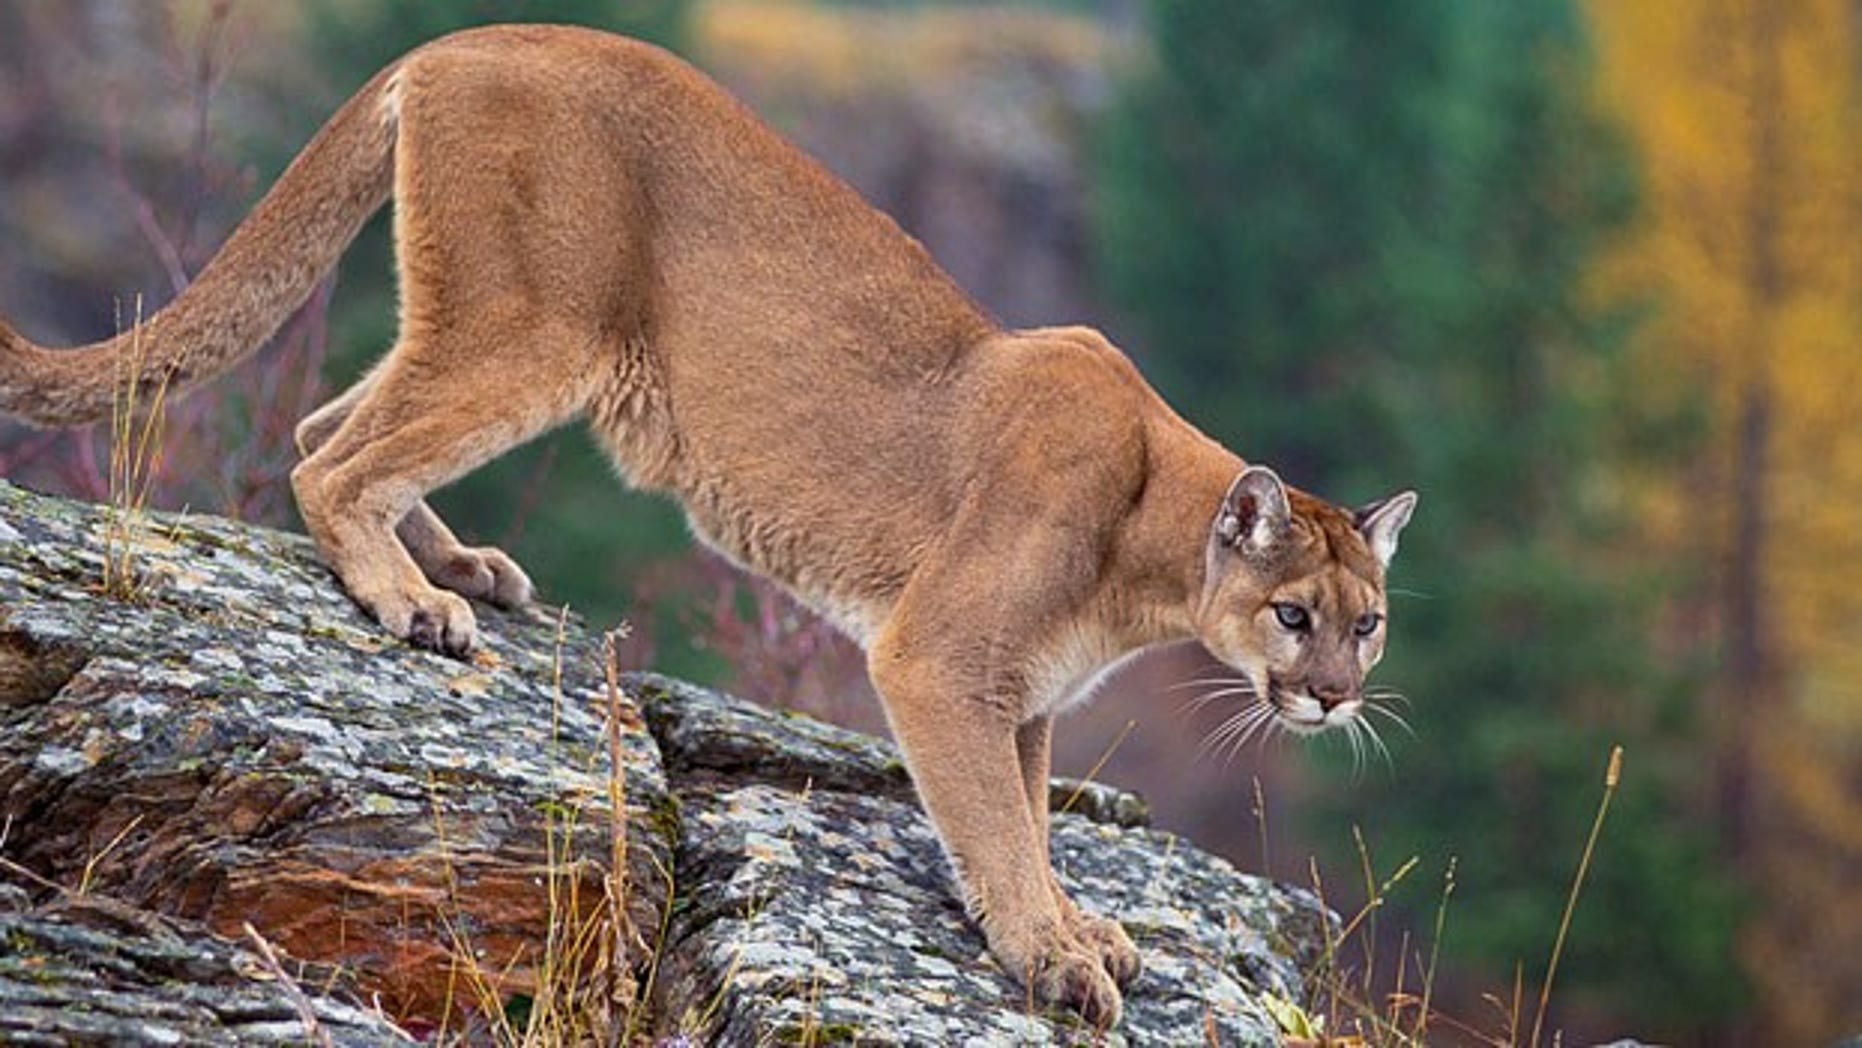 Colorado man fights off, kills mountain lion during trail run, suffers serious injuries